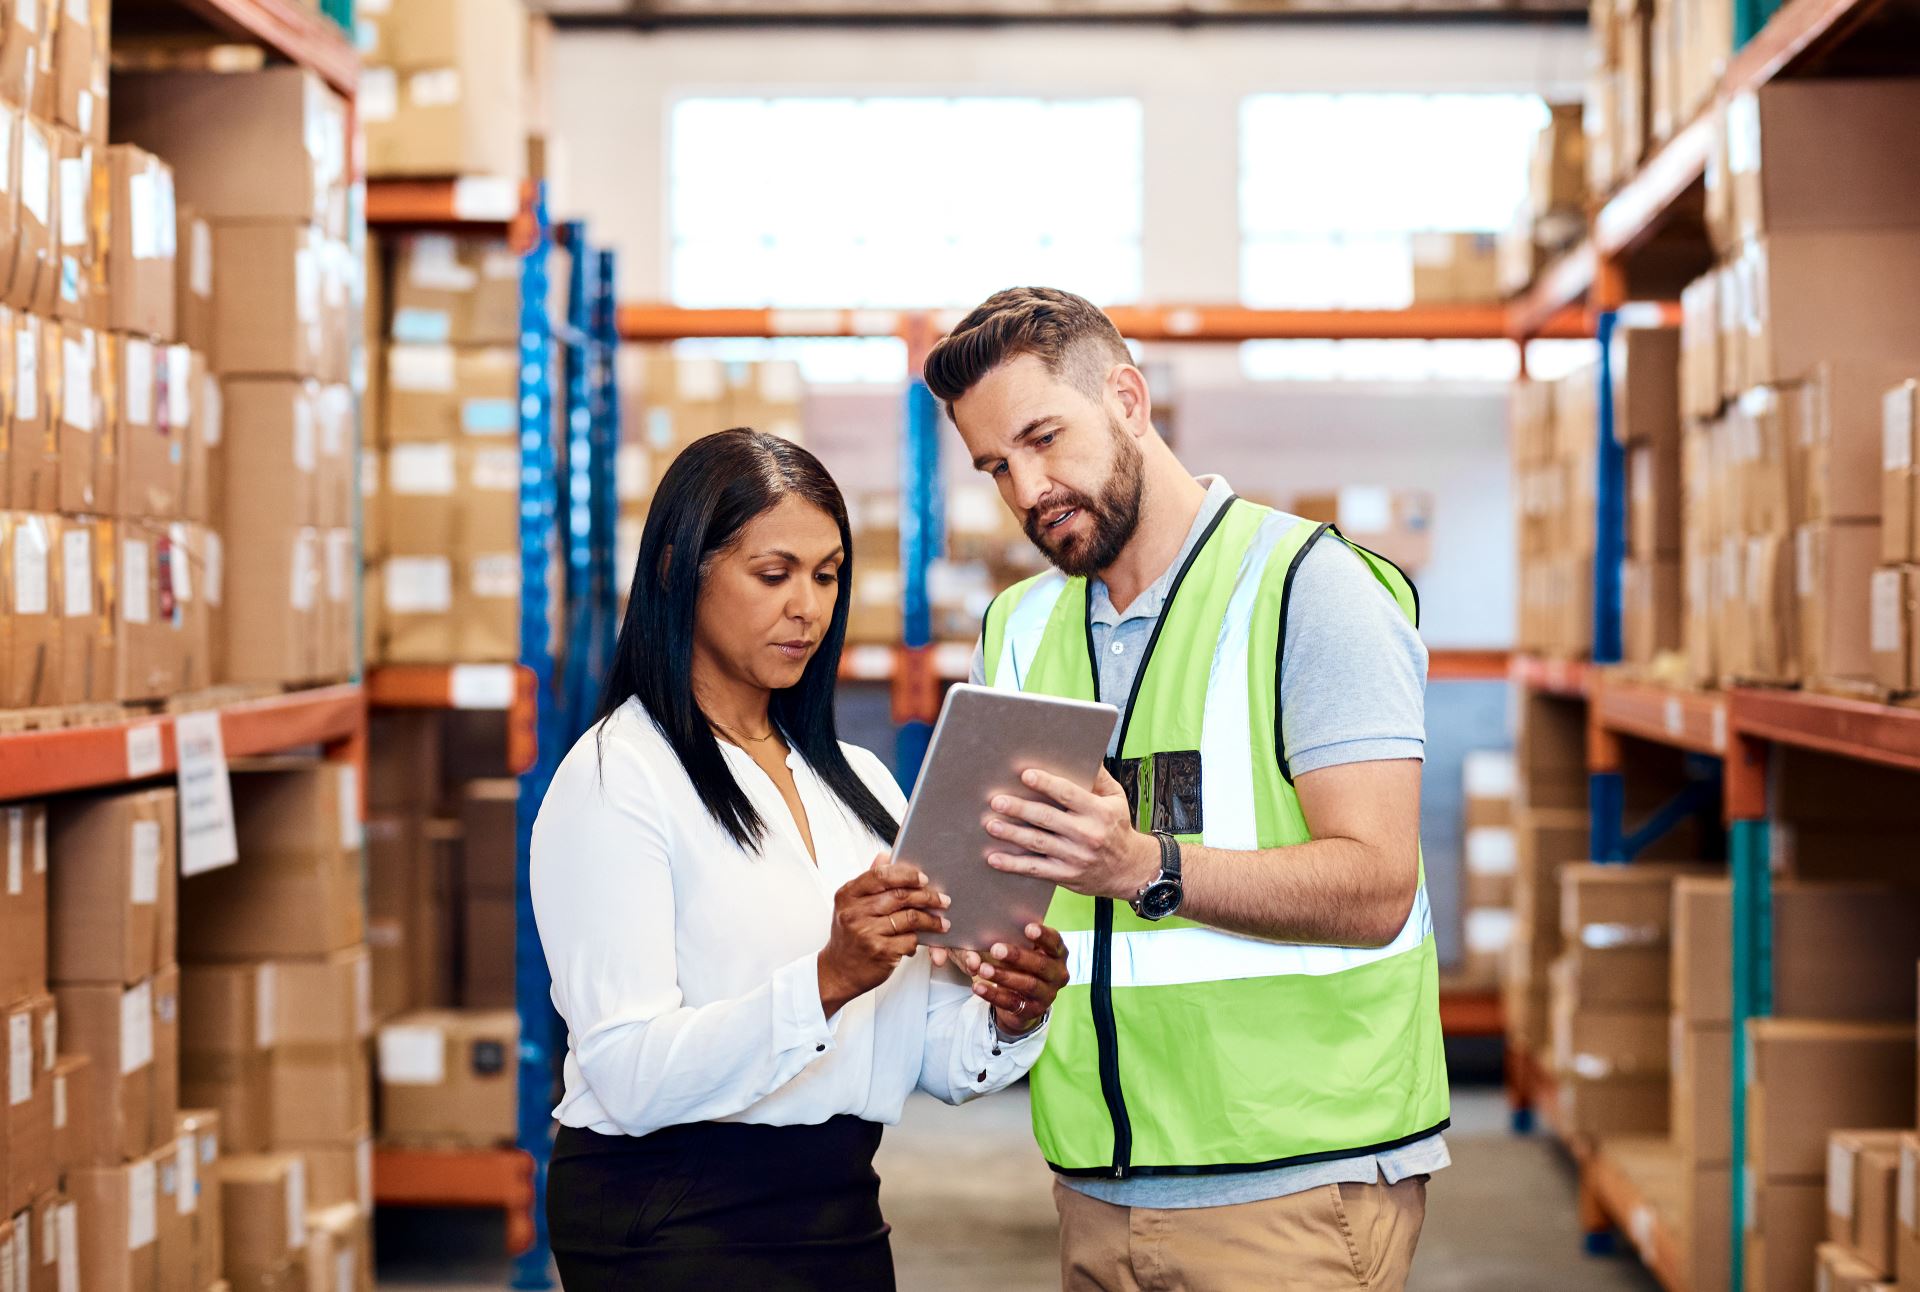 Supply chain: woman and man in a warehouse looking at a tablet